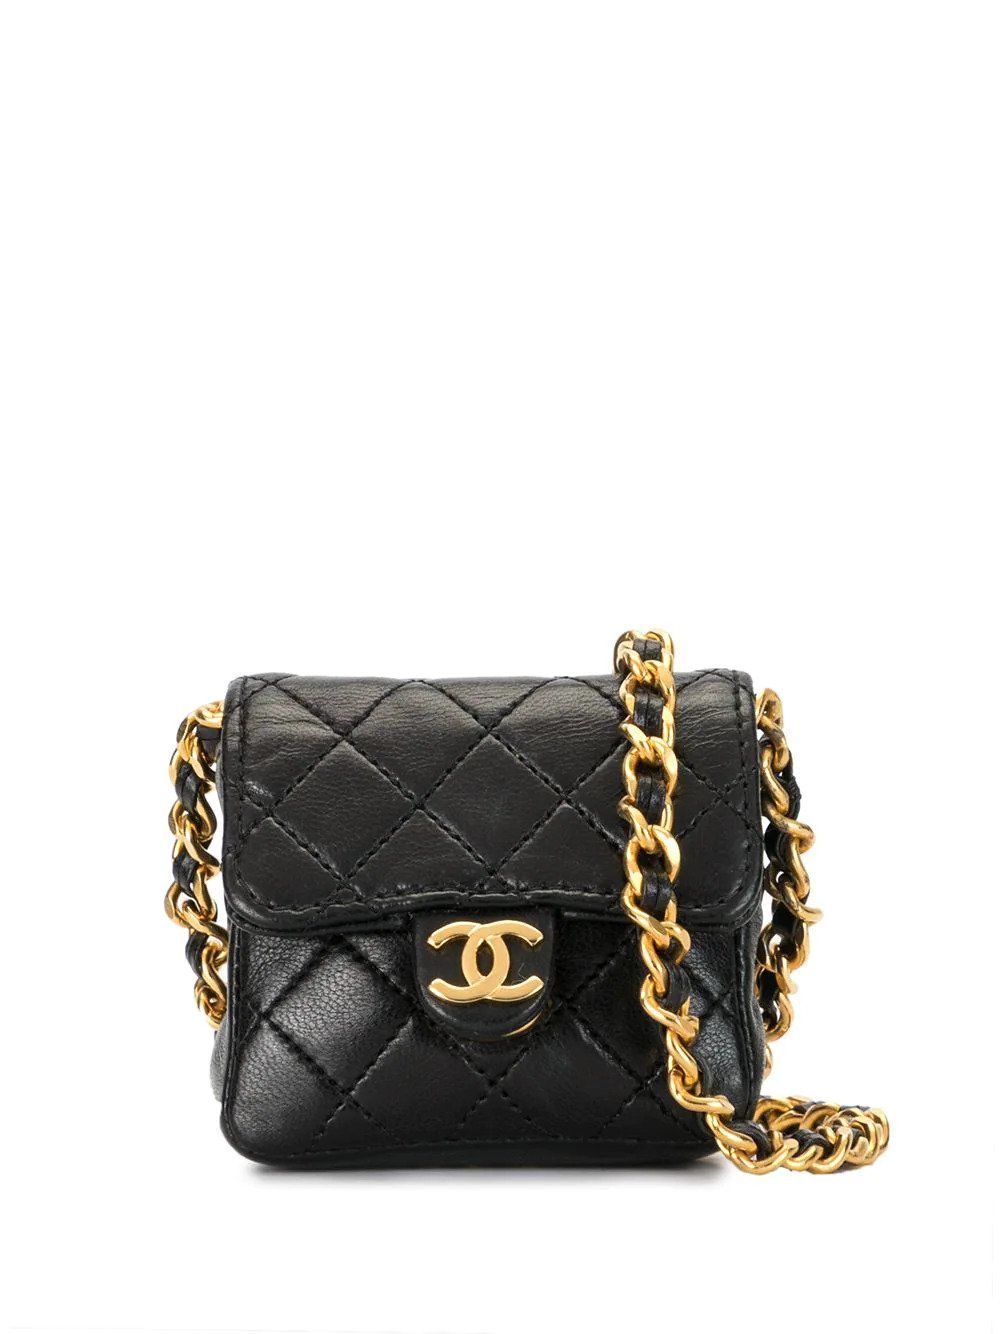 How to Buy a Guaranteed Authentic PreOwned Chanel Bag  HG Bags Online